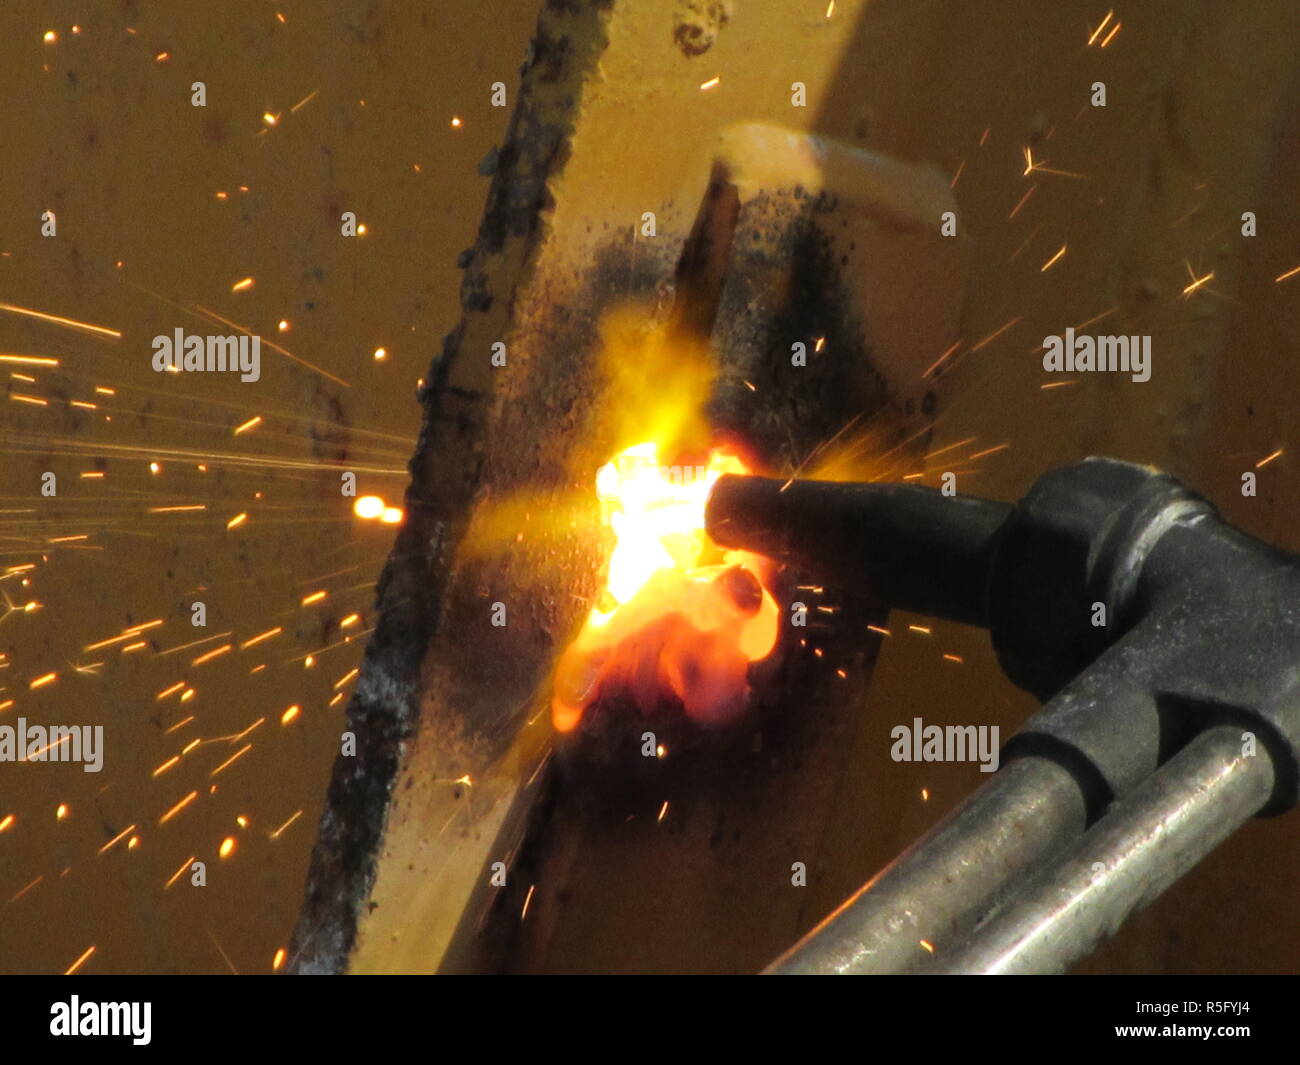 Hot Sparks of fire from steel cutting machines when men are using the grinder disc to cut steel or the oxygen weld to weld steel parts together Stock Photo